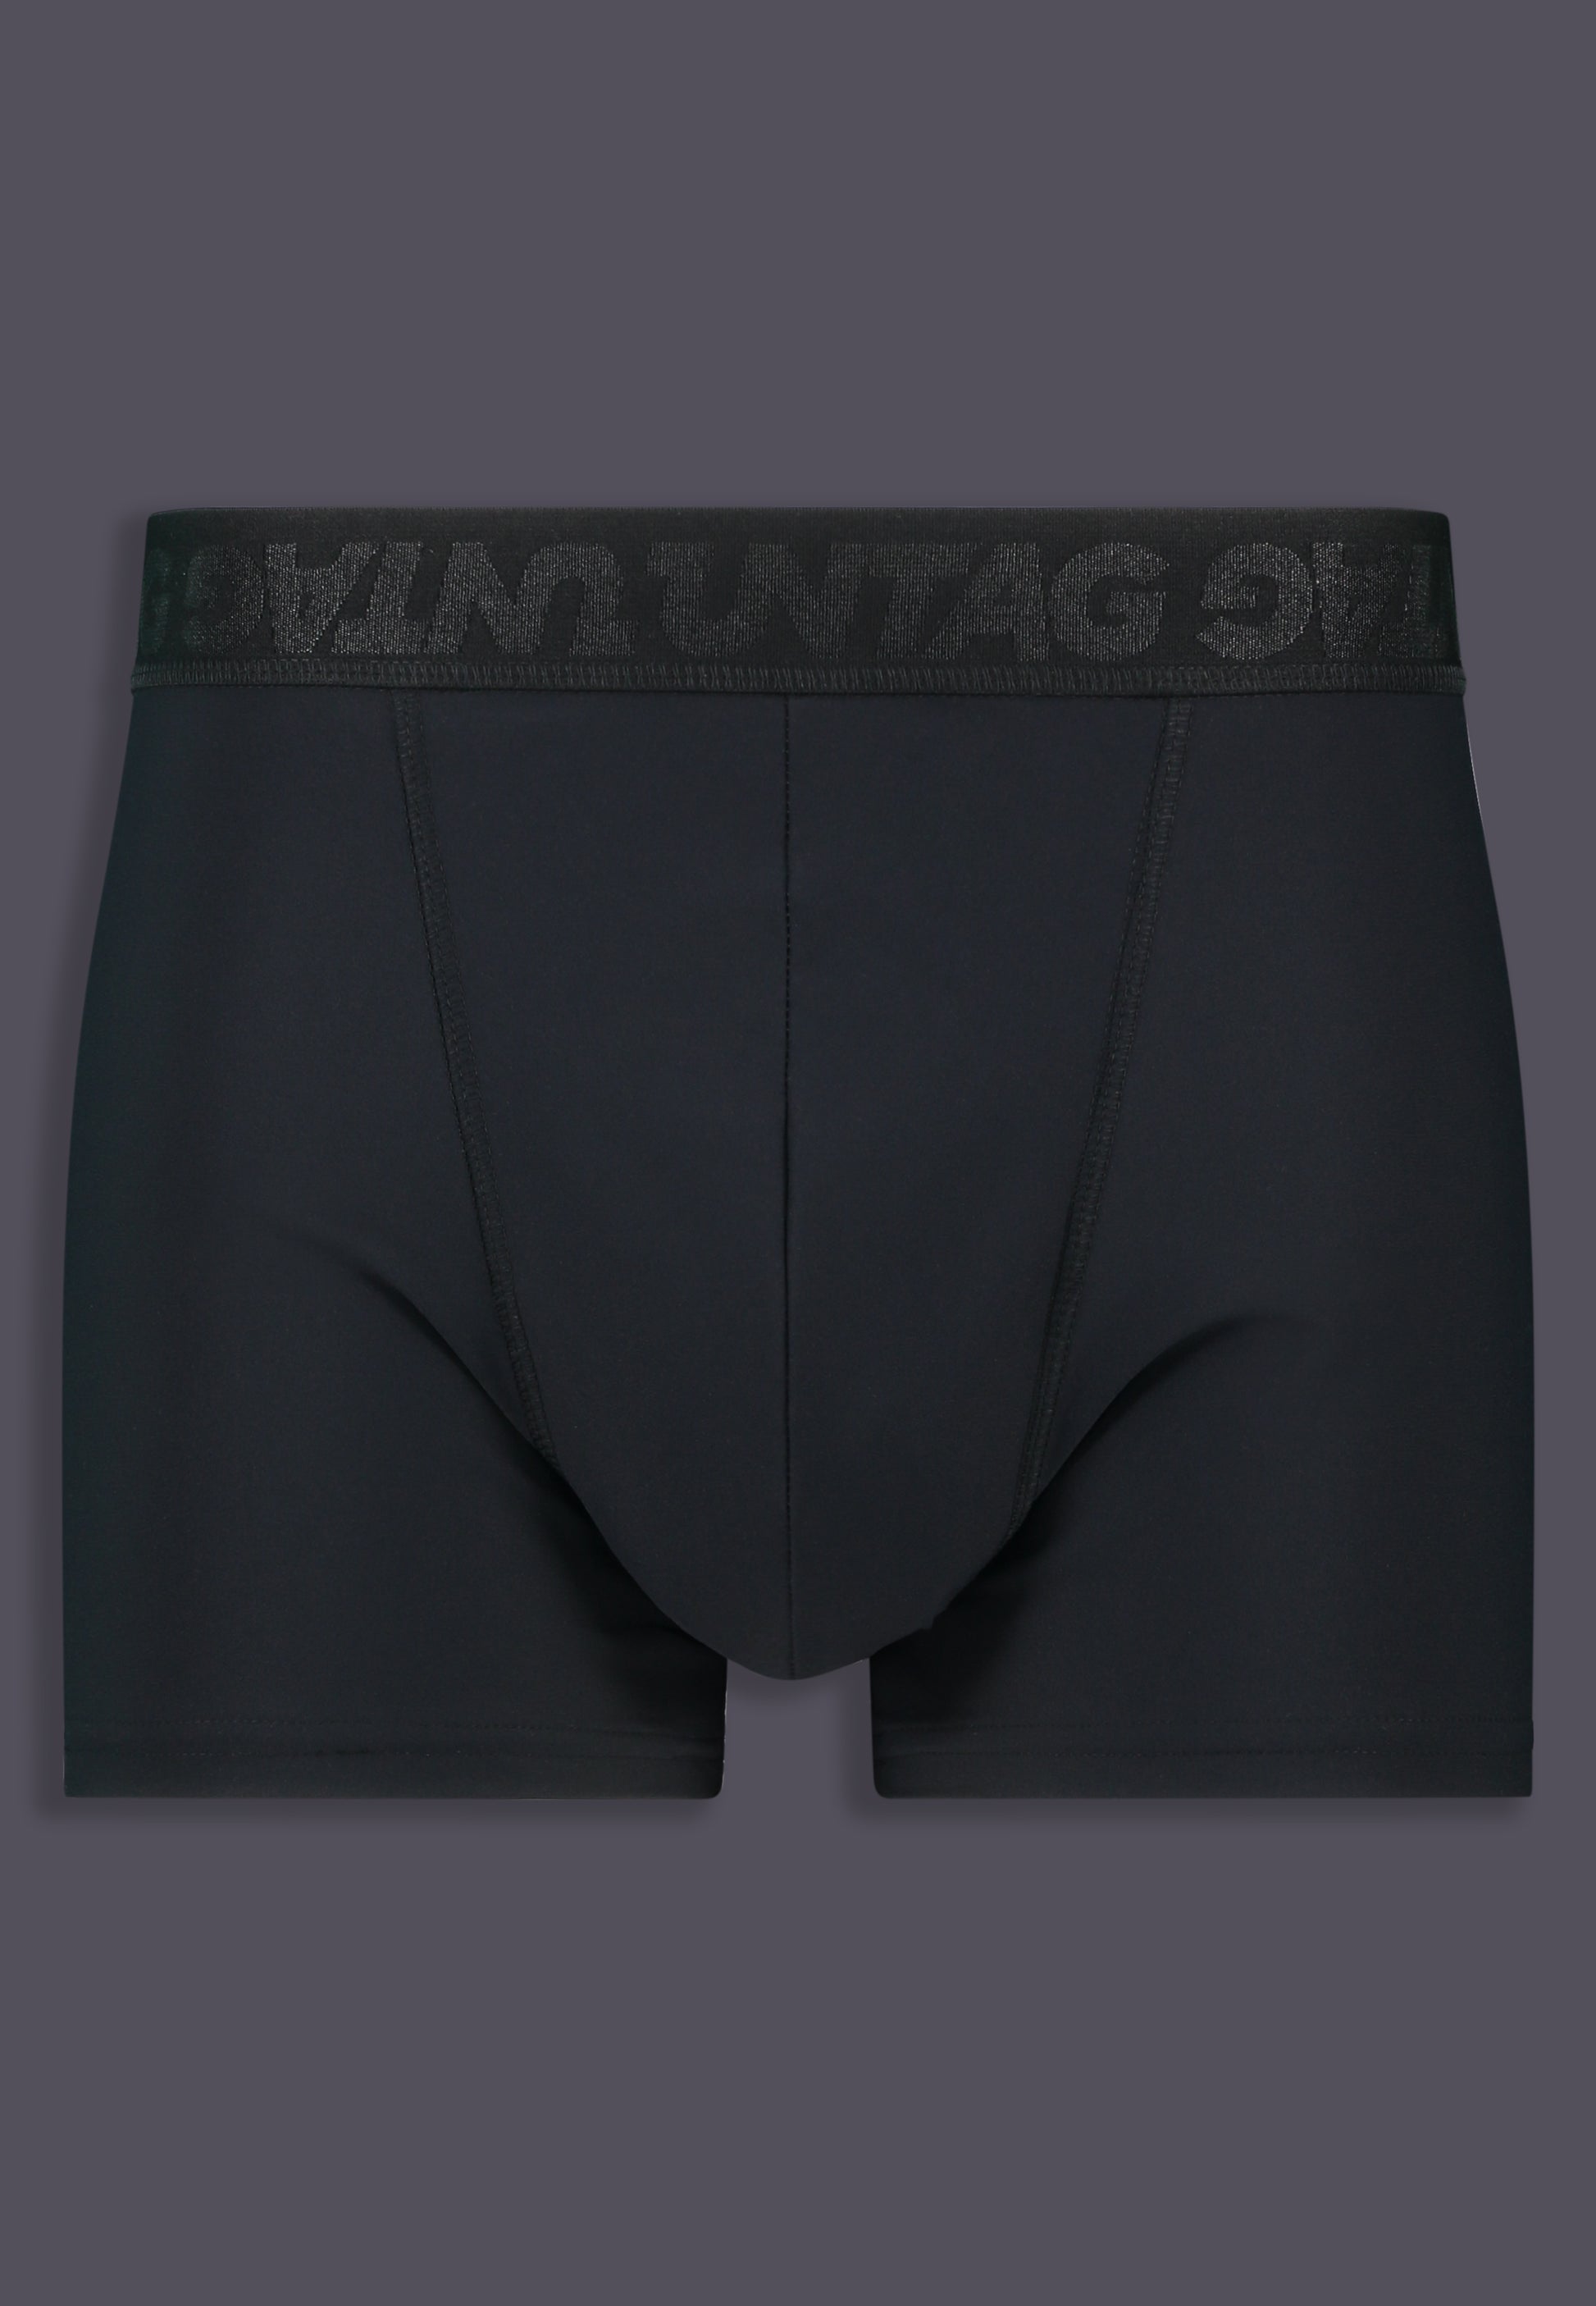 Boxers or briefs? Don't be left behindpre-order Native Undies now